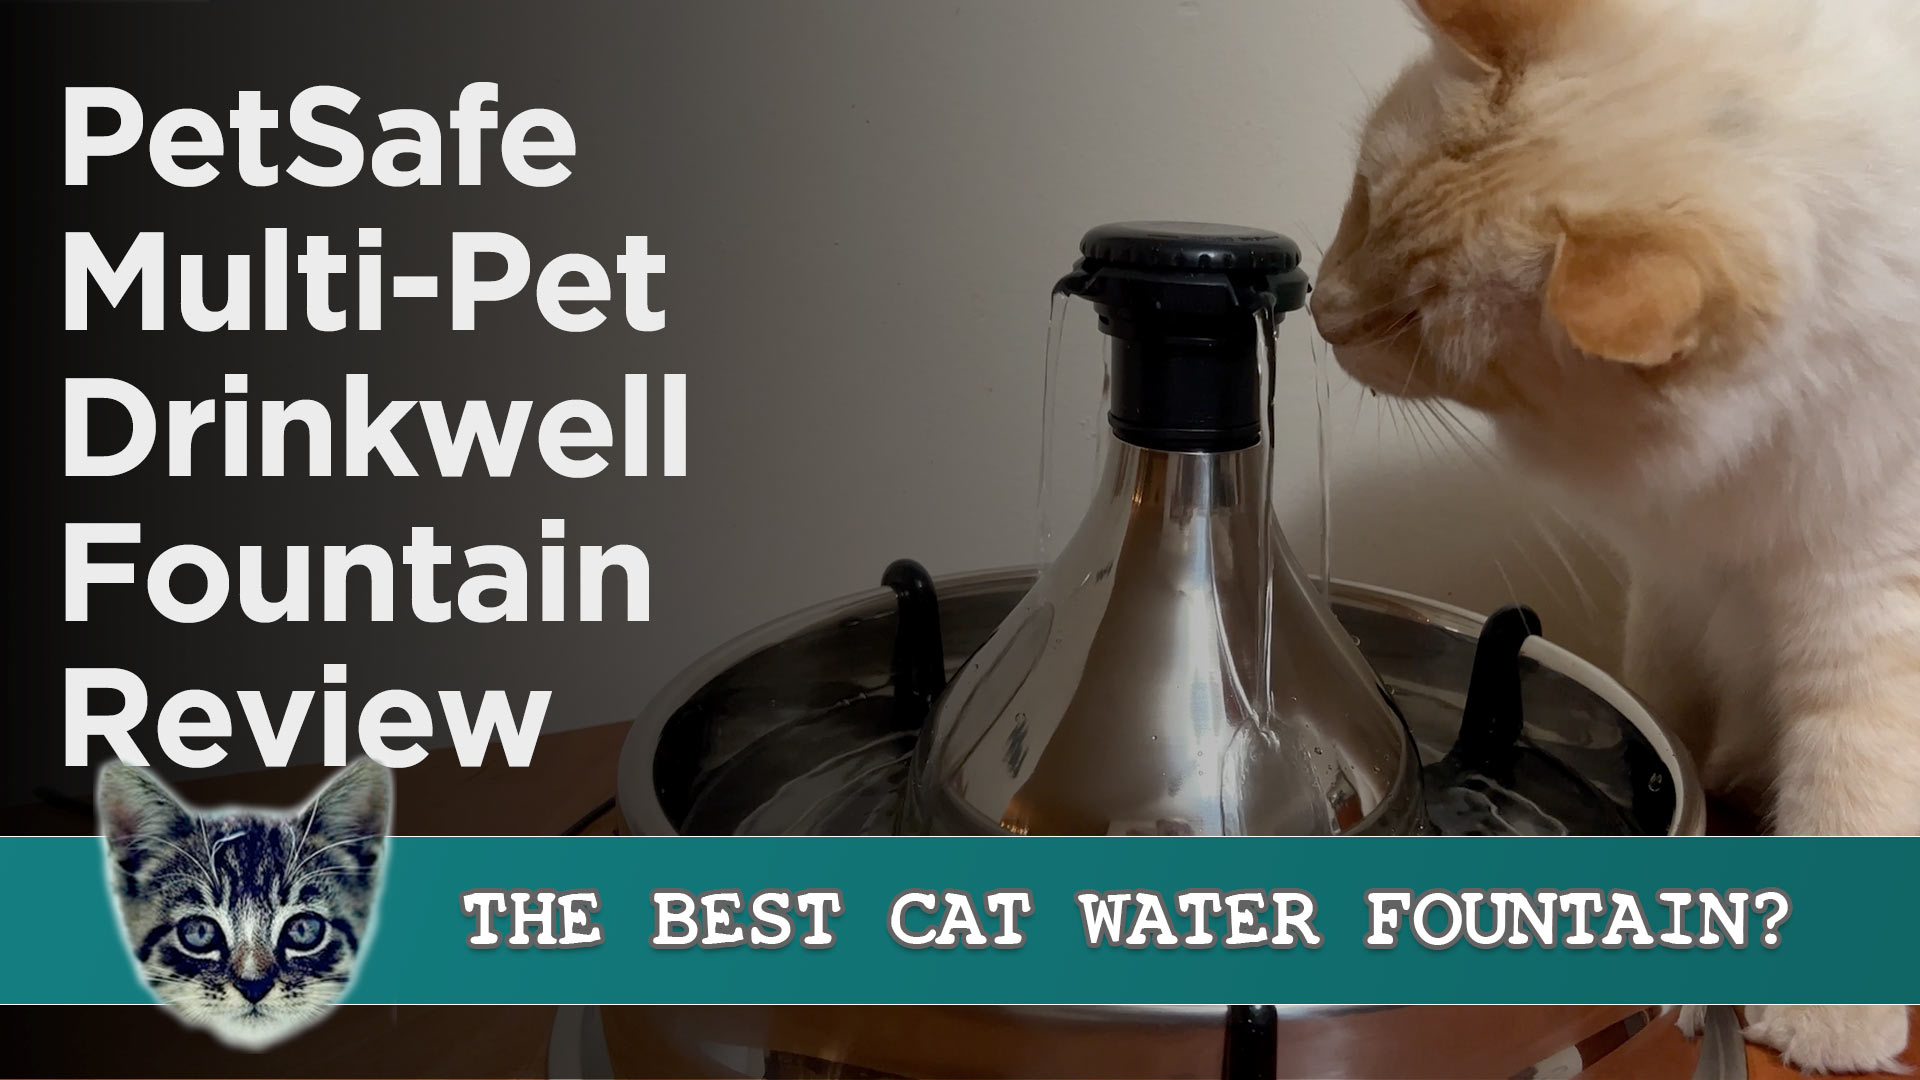 Should You Get A Cat Water Fountain? : Why It's a Good Idea!